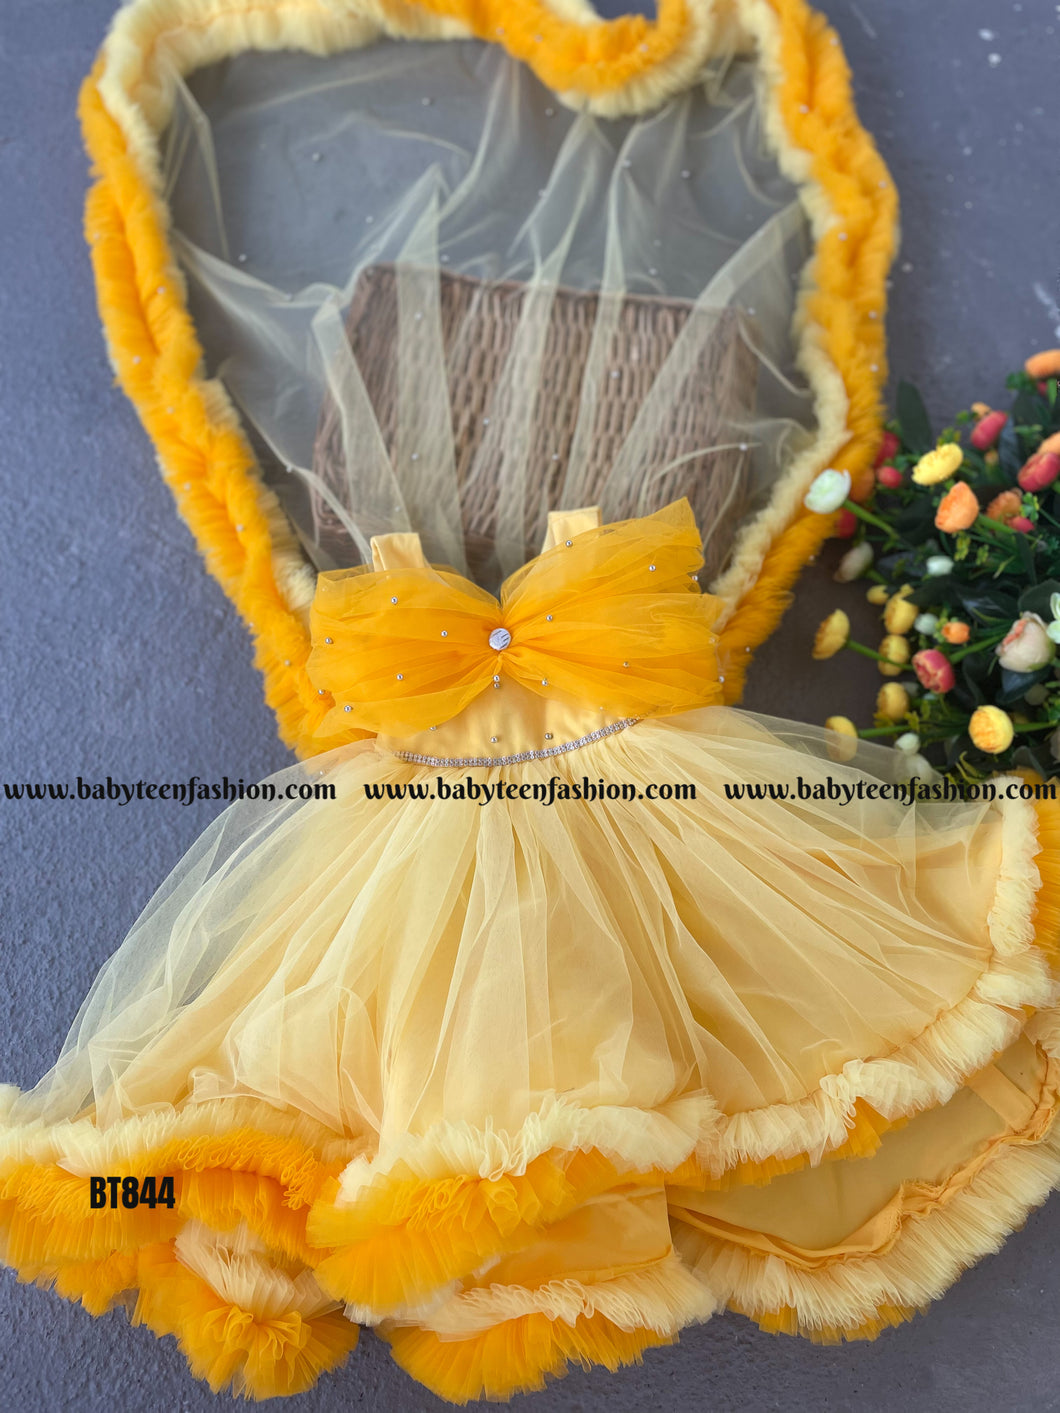 BT844 Shades of Yellow Frock